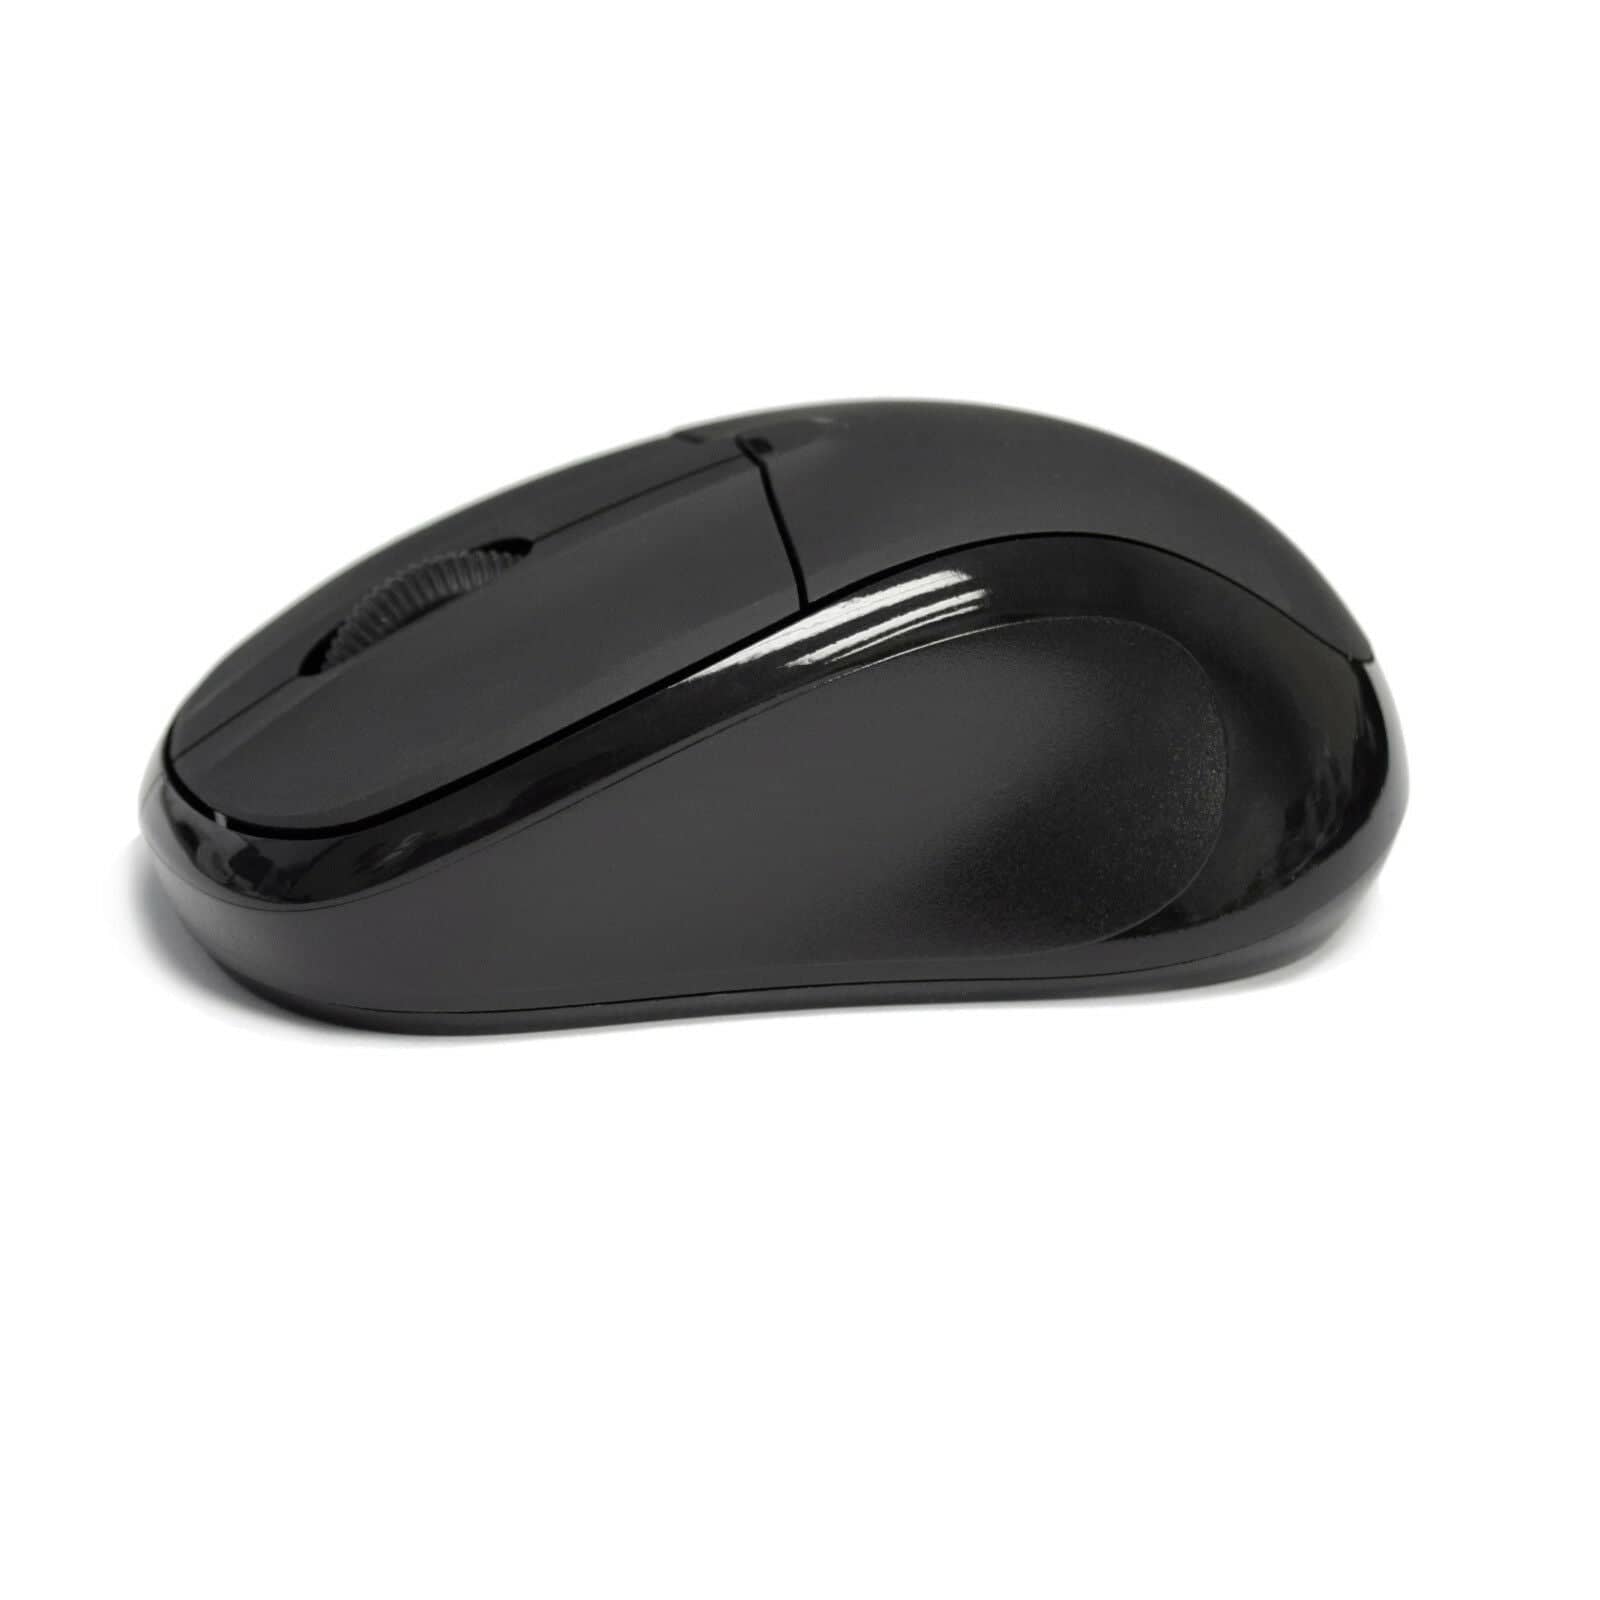 Hosim 2.4GHz Wireless Cordless Optical Mouse Mice +USB Receiver for PC Laptop